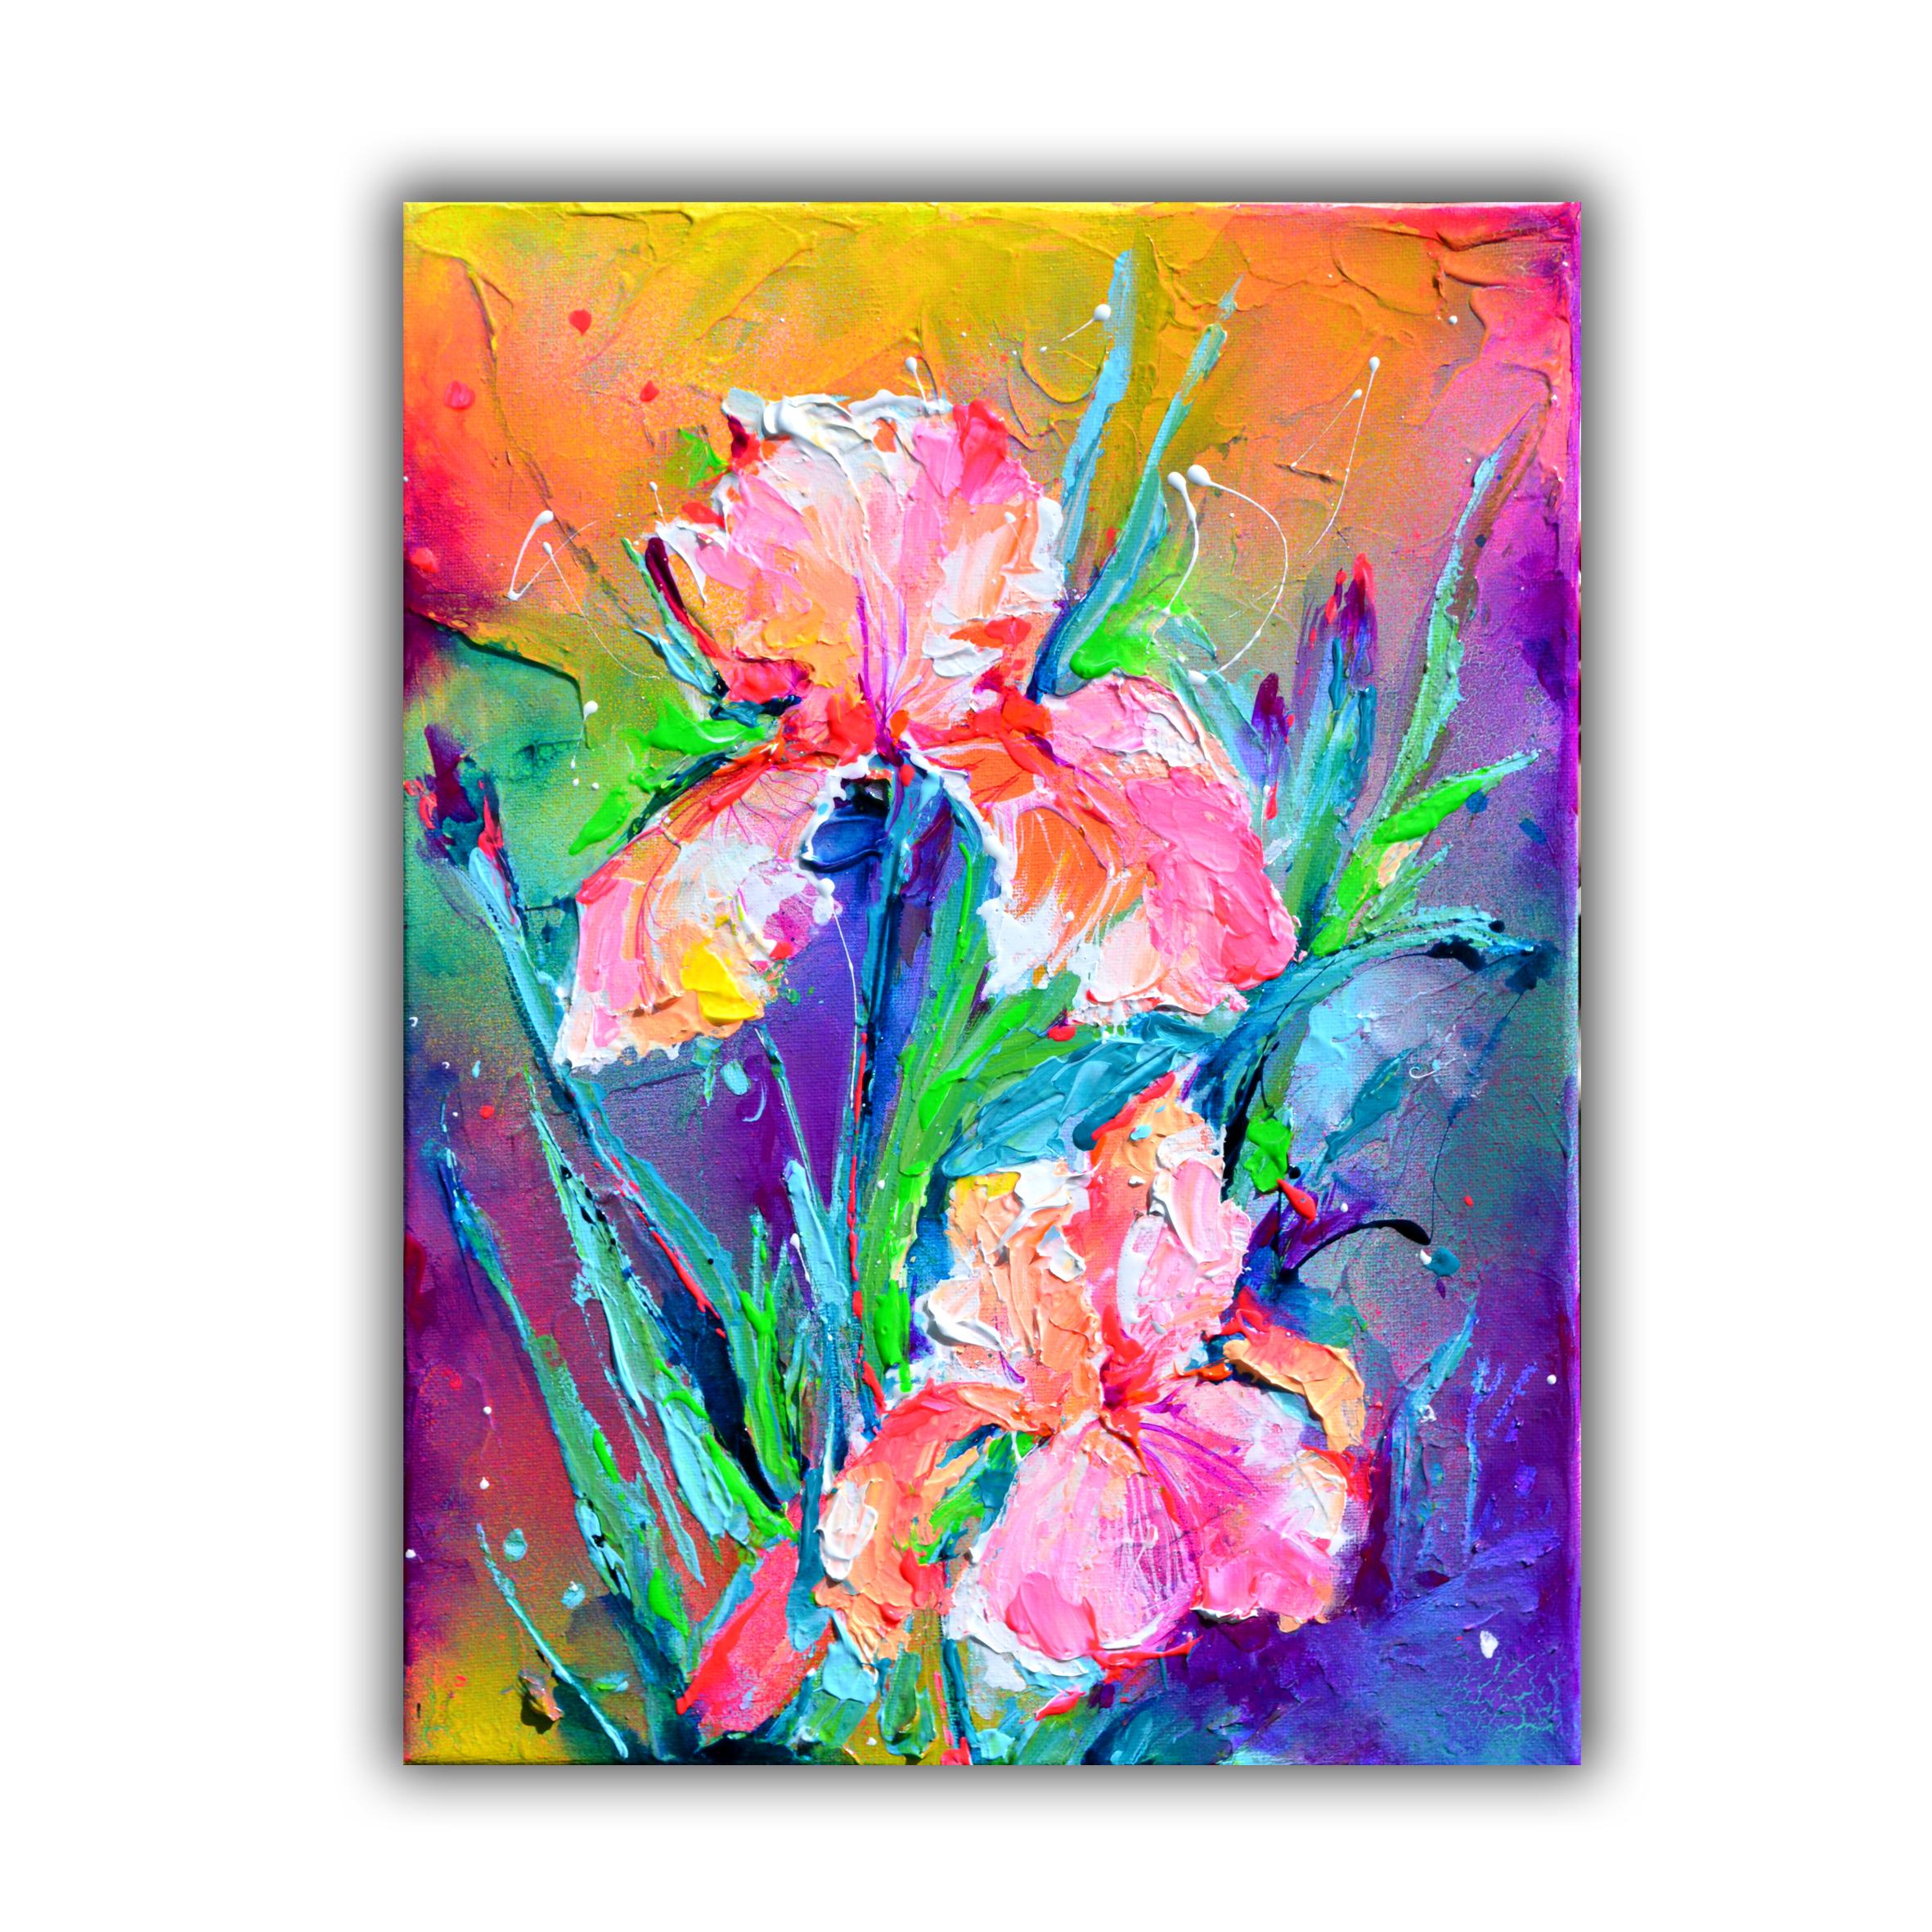 FREE WORLDWIDE SHIPPING!READY TO HANG PAINTING with the edges painted.
A beautiful modern iris field painting, made with professional varnished acrylics and Amsterdam acrylic sprays on stretched heavy canvas.
Dimensions: 40x30X1.5 cm, 15.8x11.9x0.6